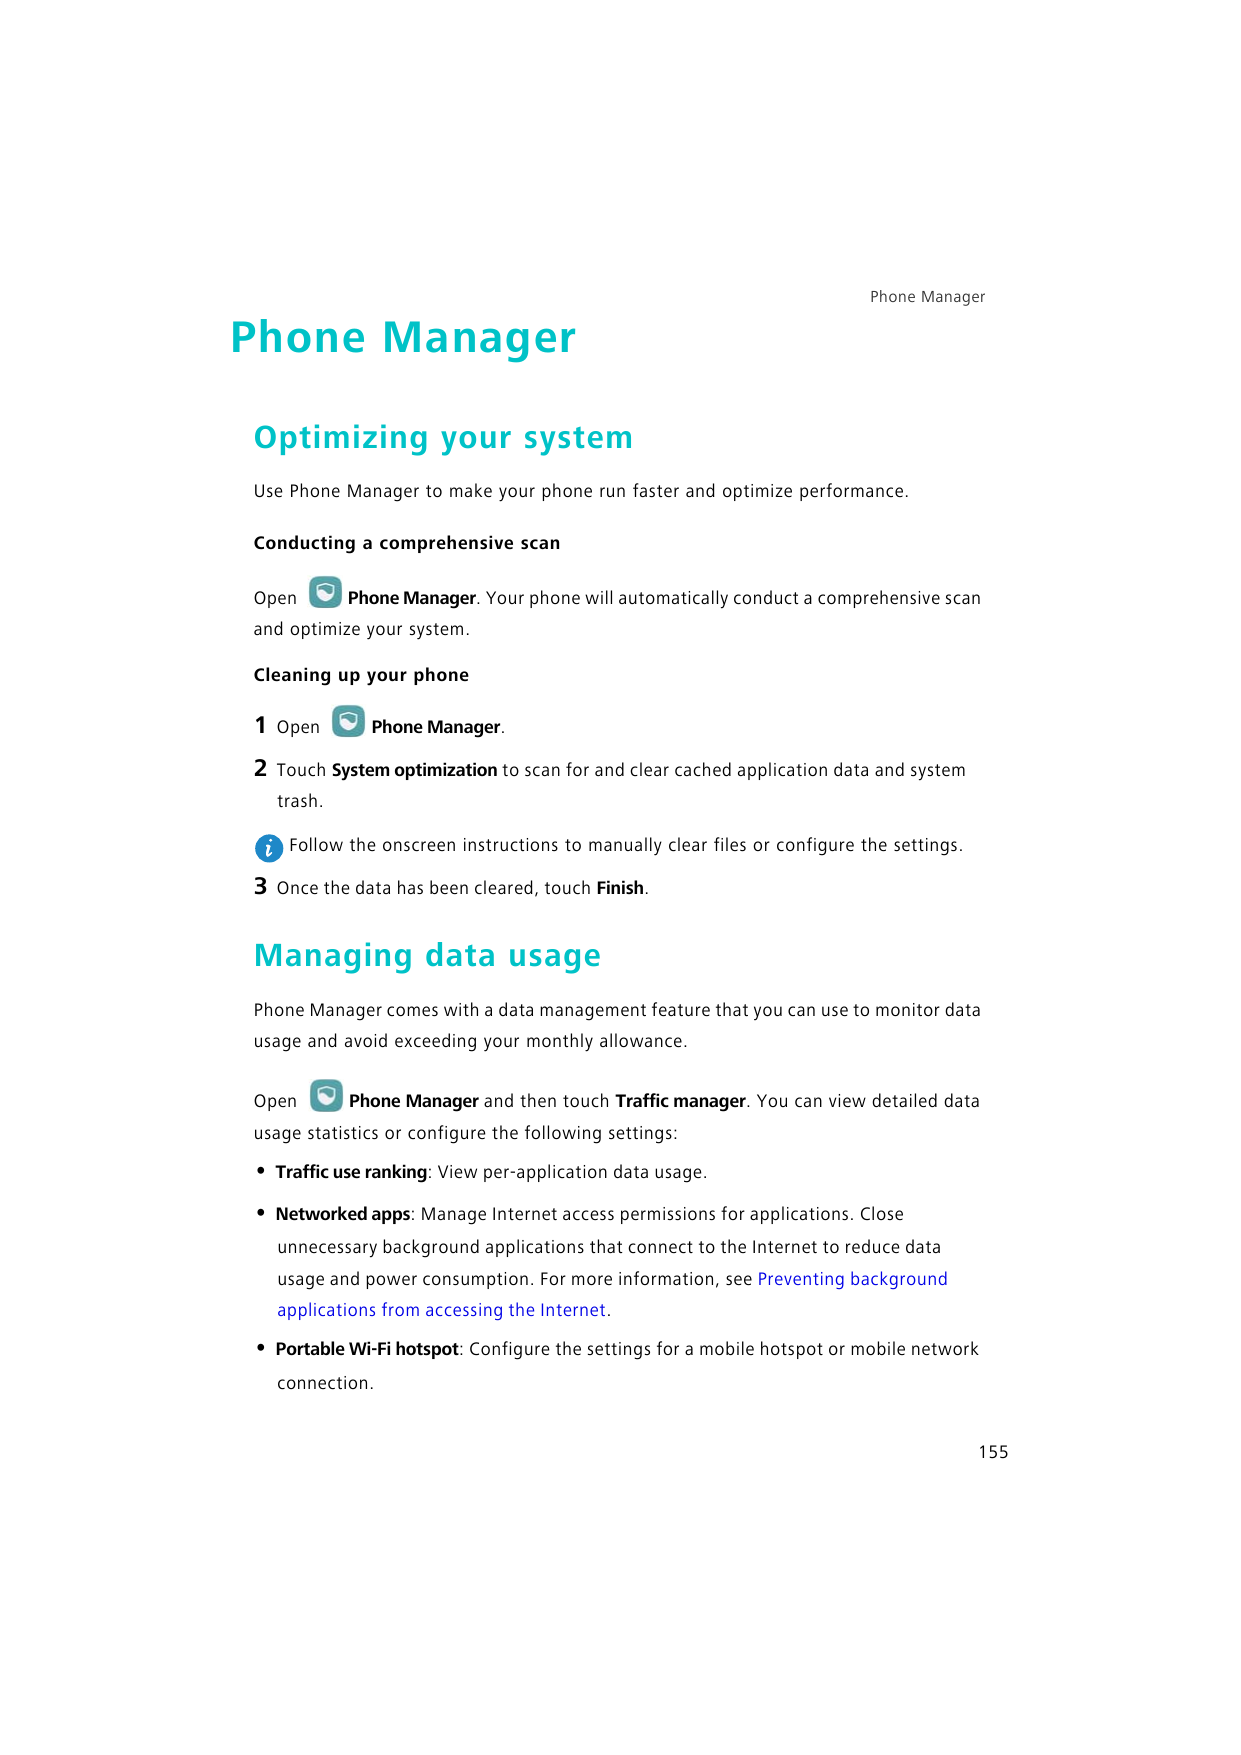 Phone ManagerPhone ManagerOptimizing your systemUse Phone Manager to make your phone run faster and optimize performance.Conduct